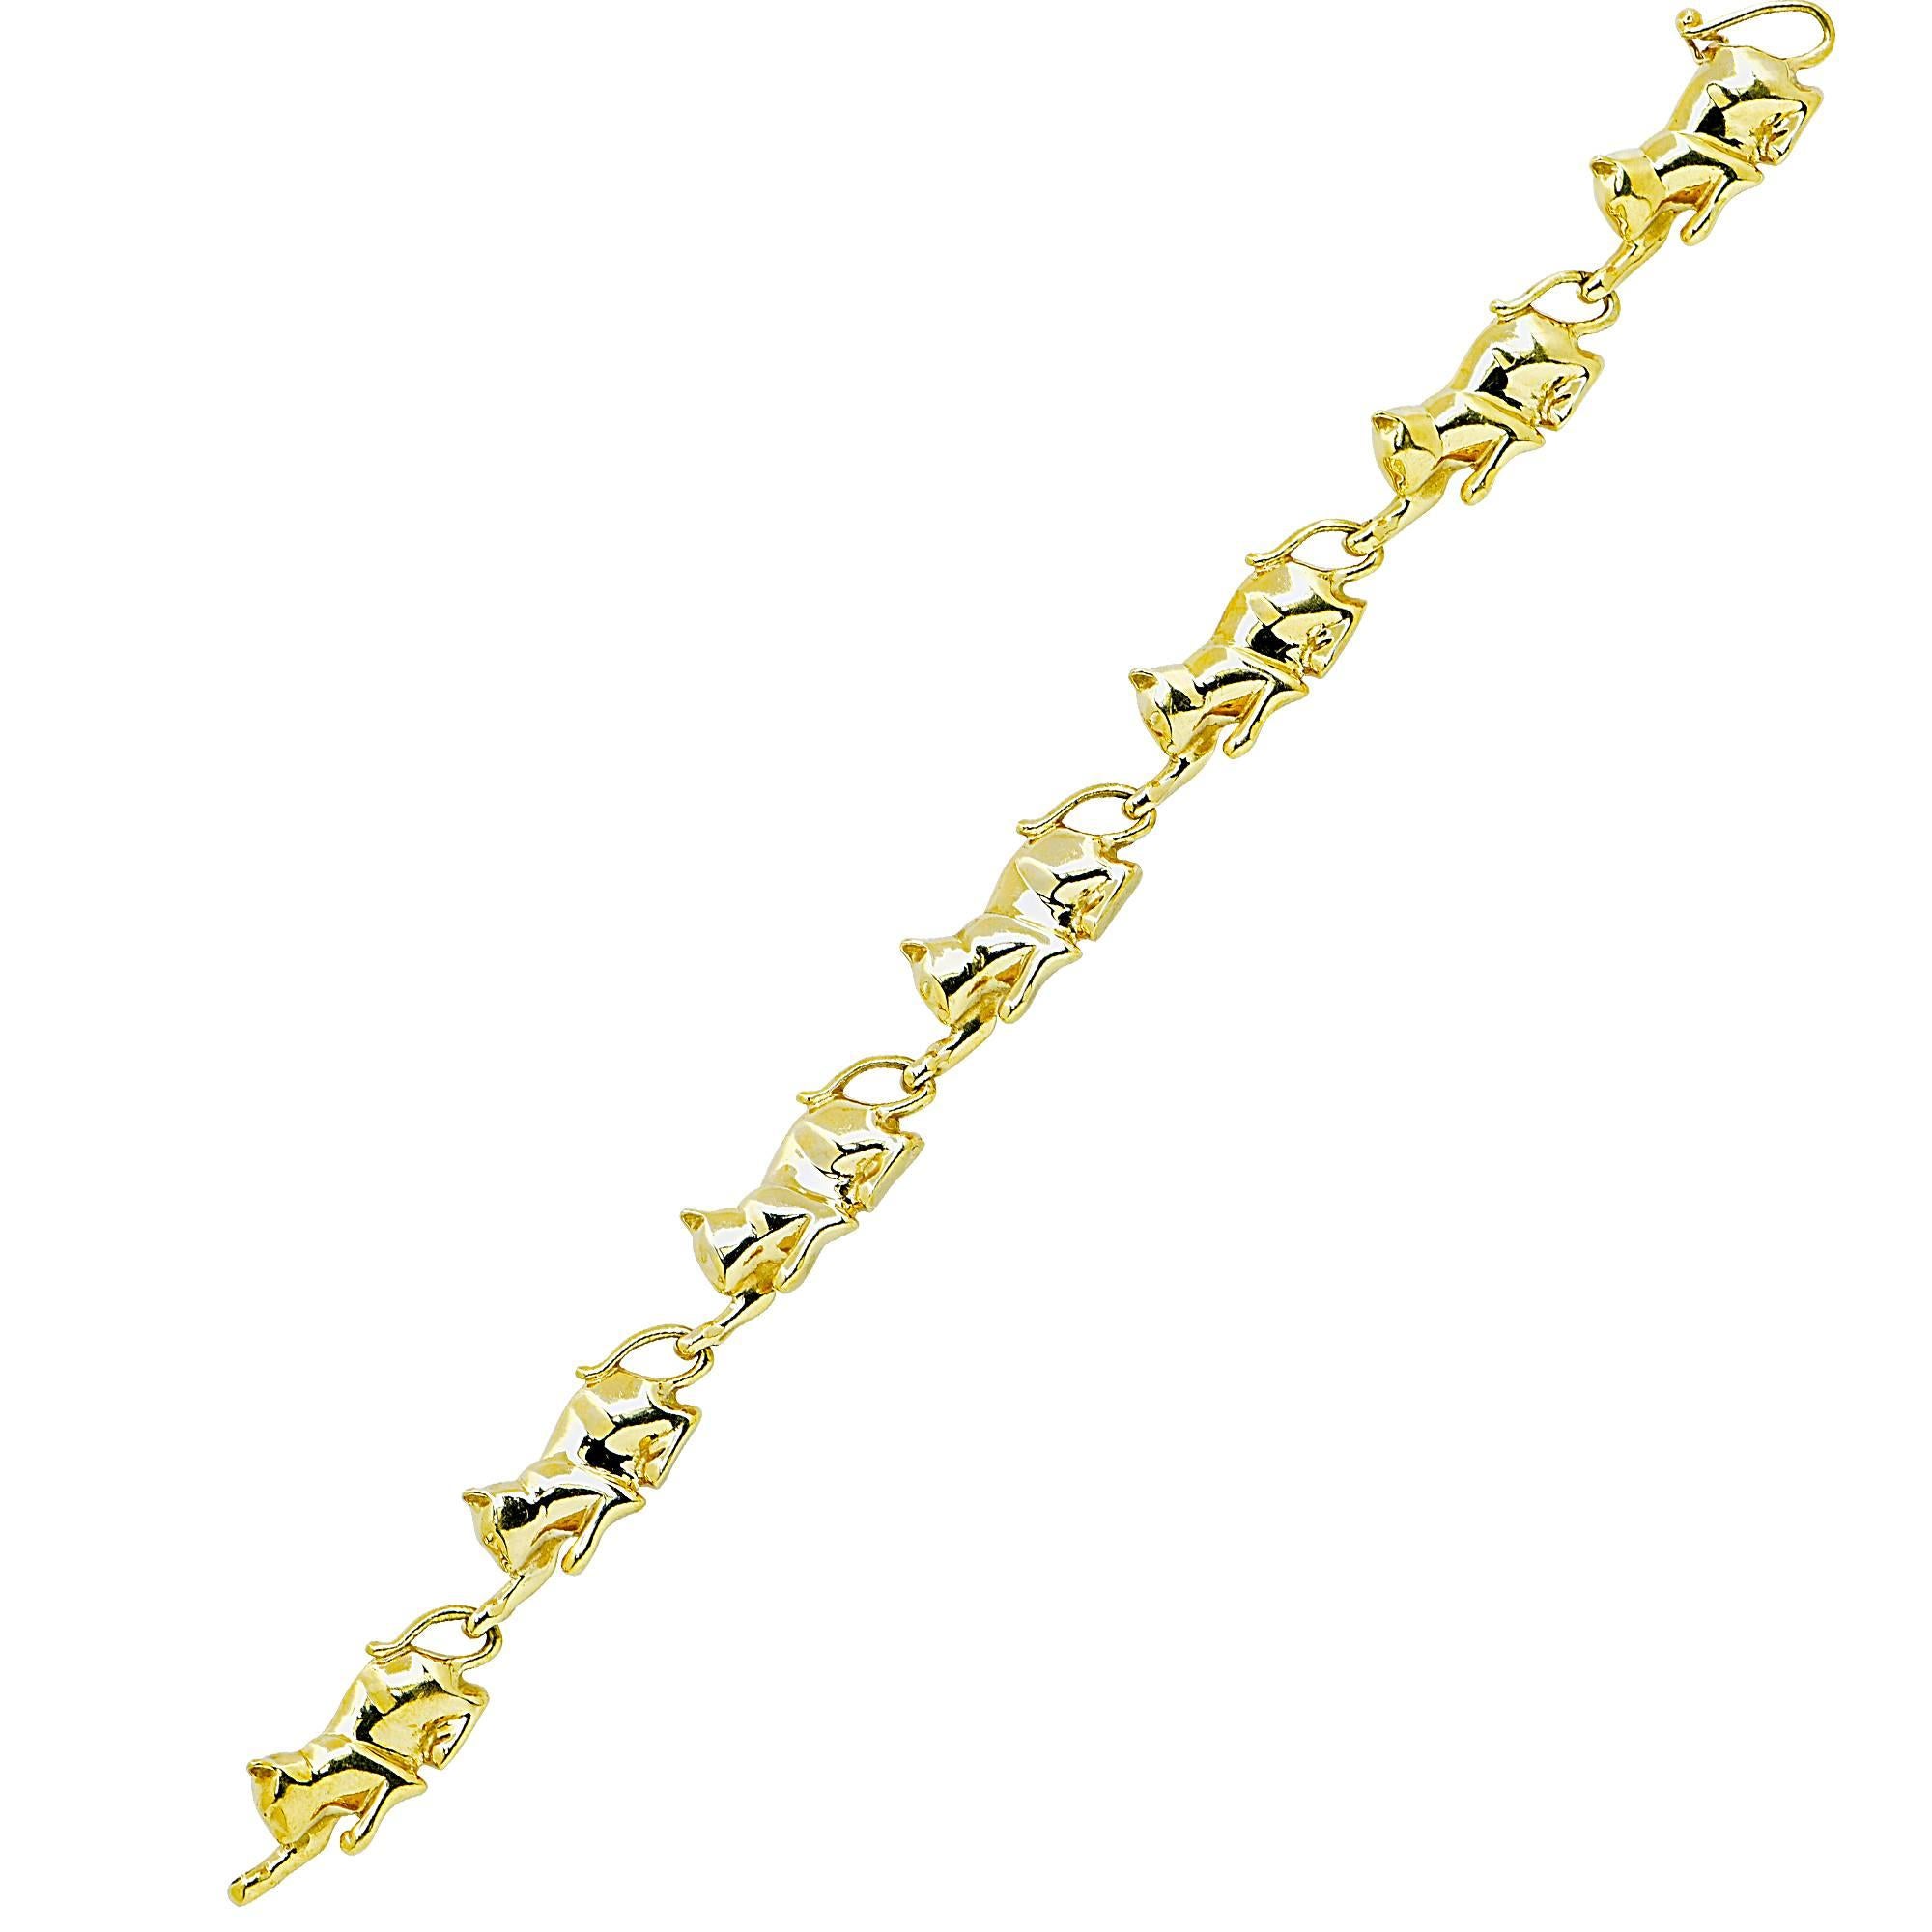 14k yellow gold cat link bracelet.

Metal weight: 19.28 grams

This yellow gold cat bracelet is accompanied by a retail appraisal performed by a GIA Graduate Gemologist.